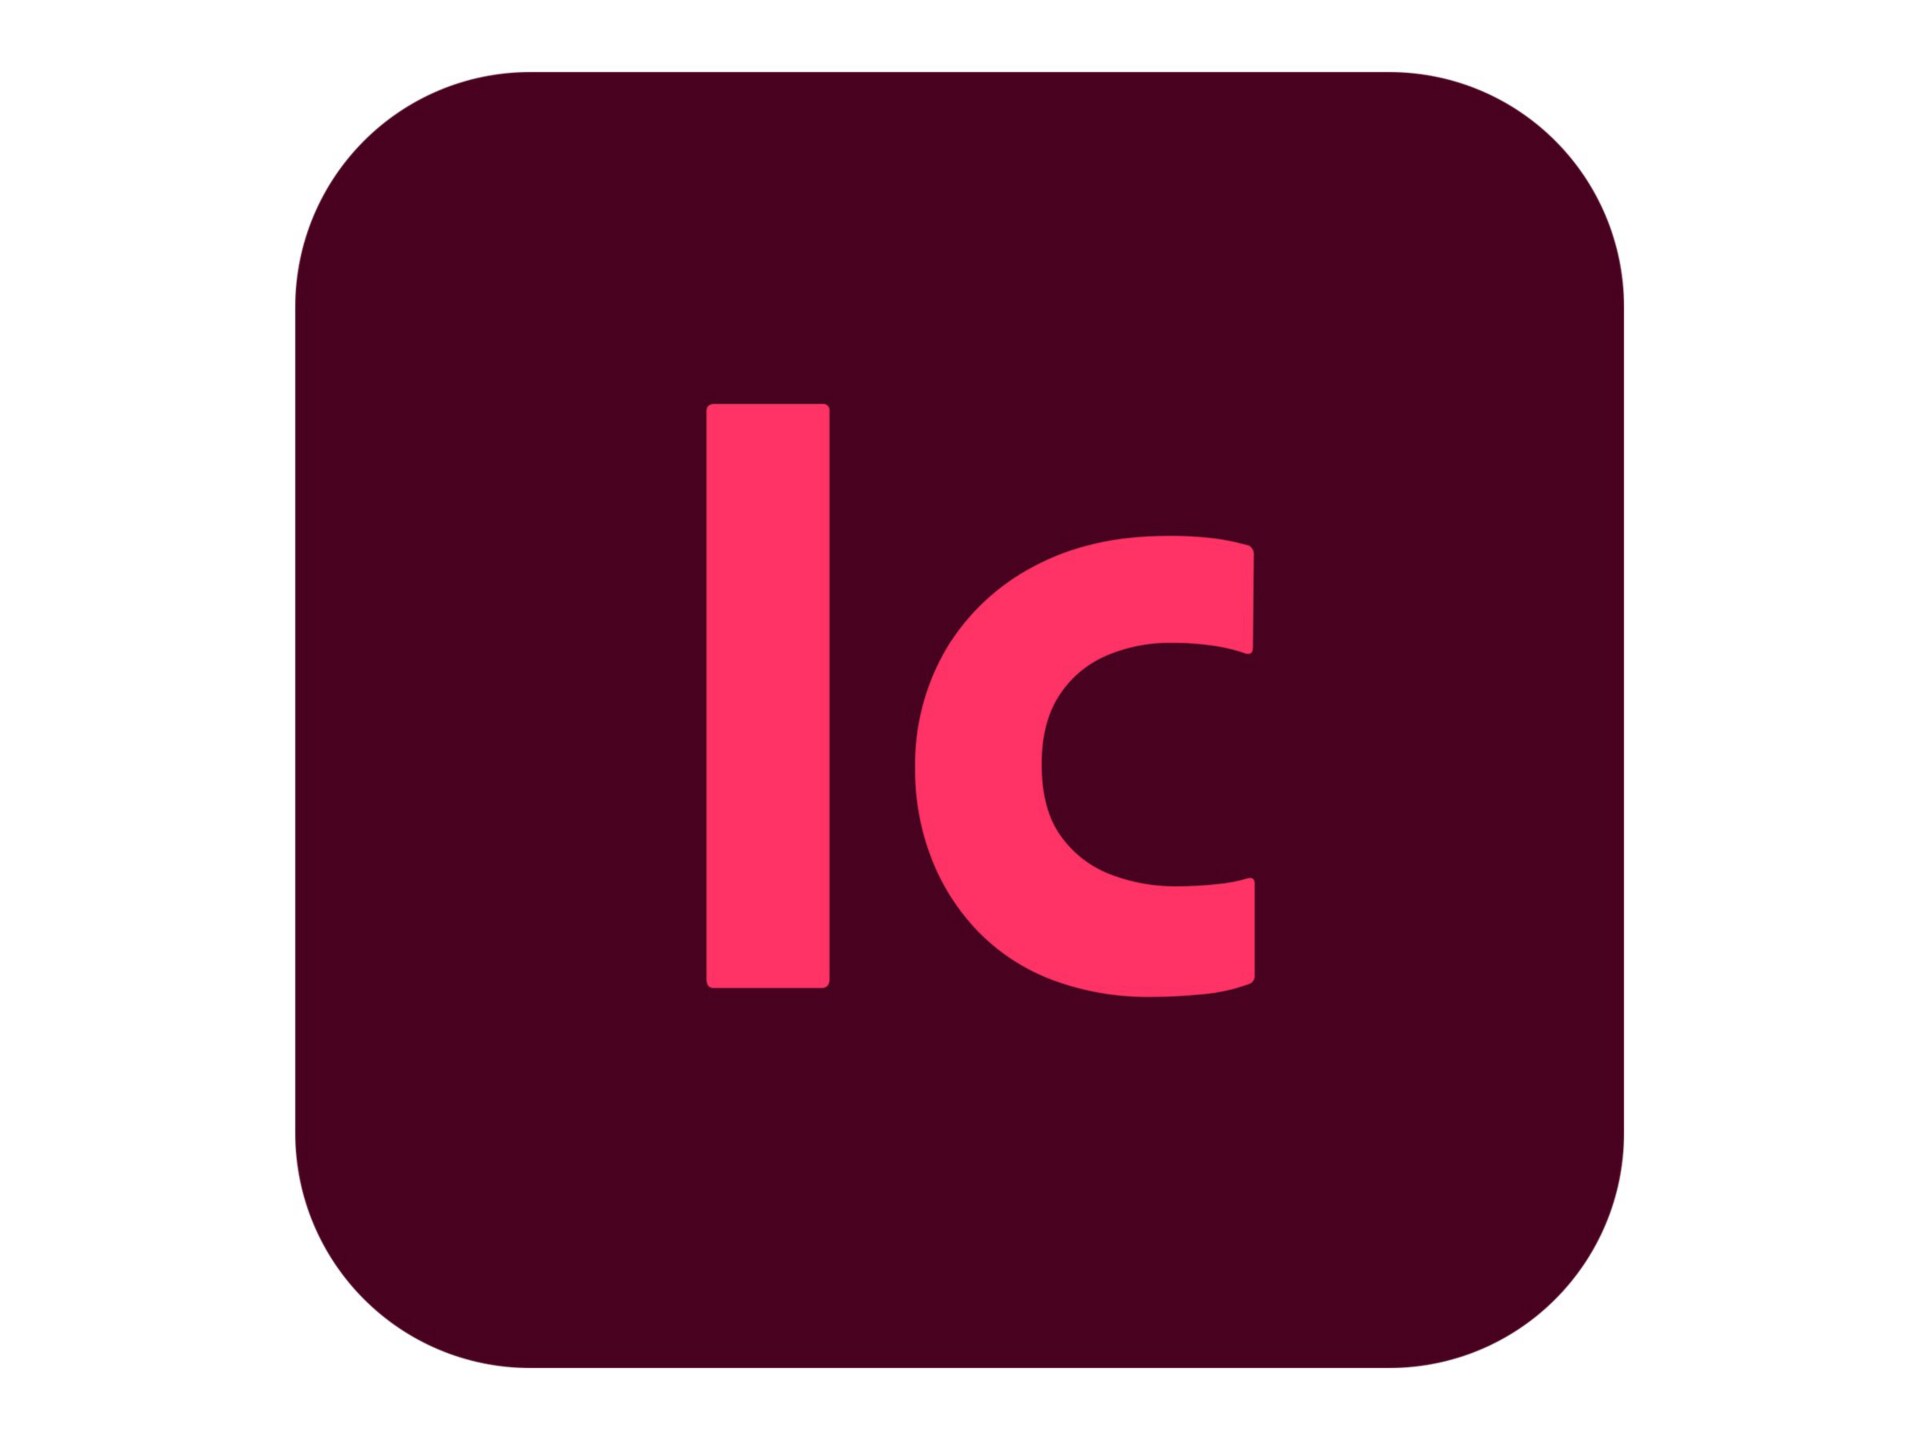 Adobe InCopy CC - Subscription New (11 months) - 1 user